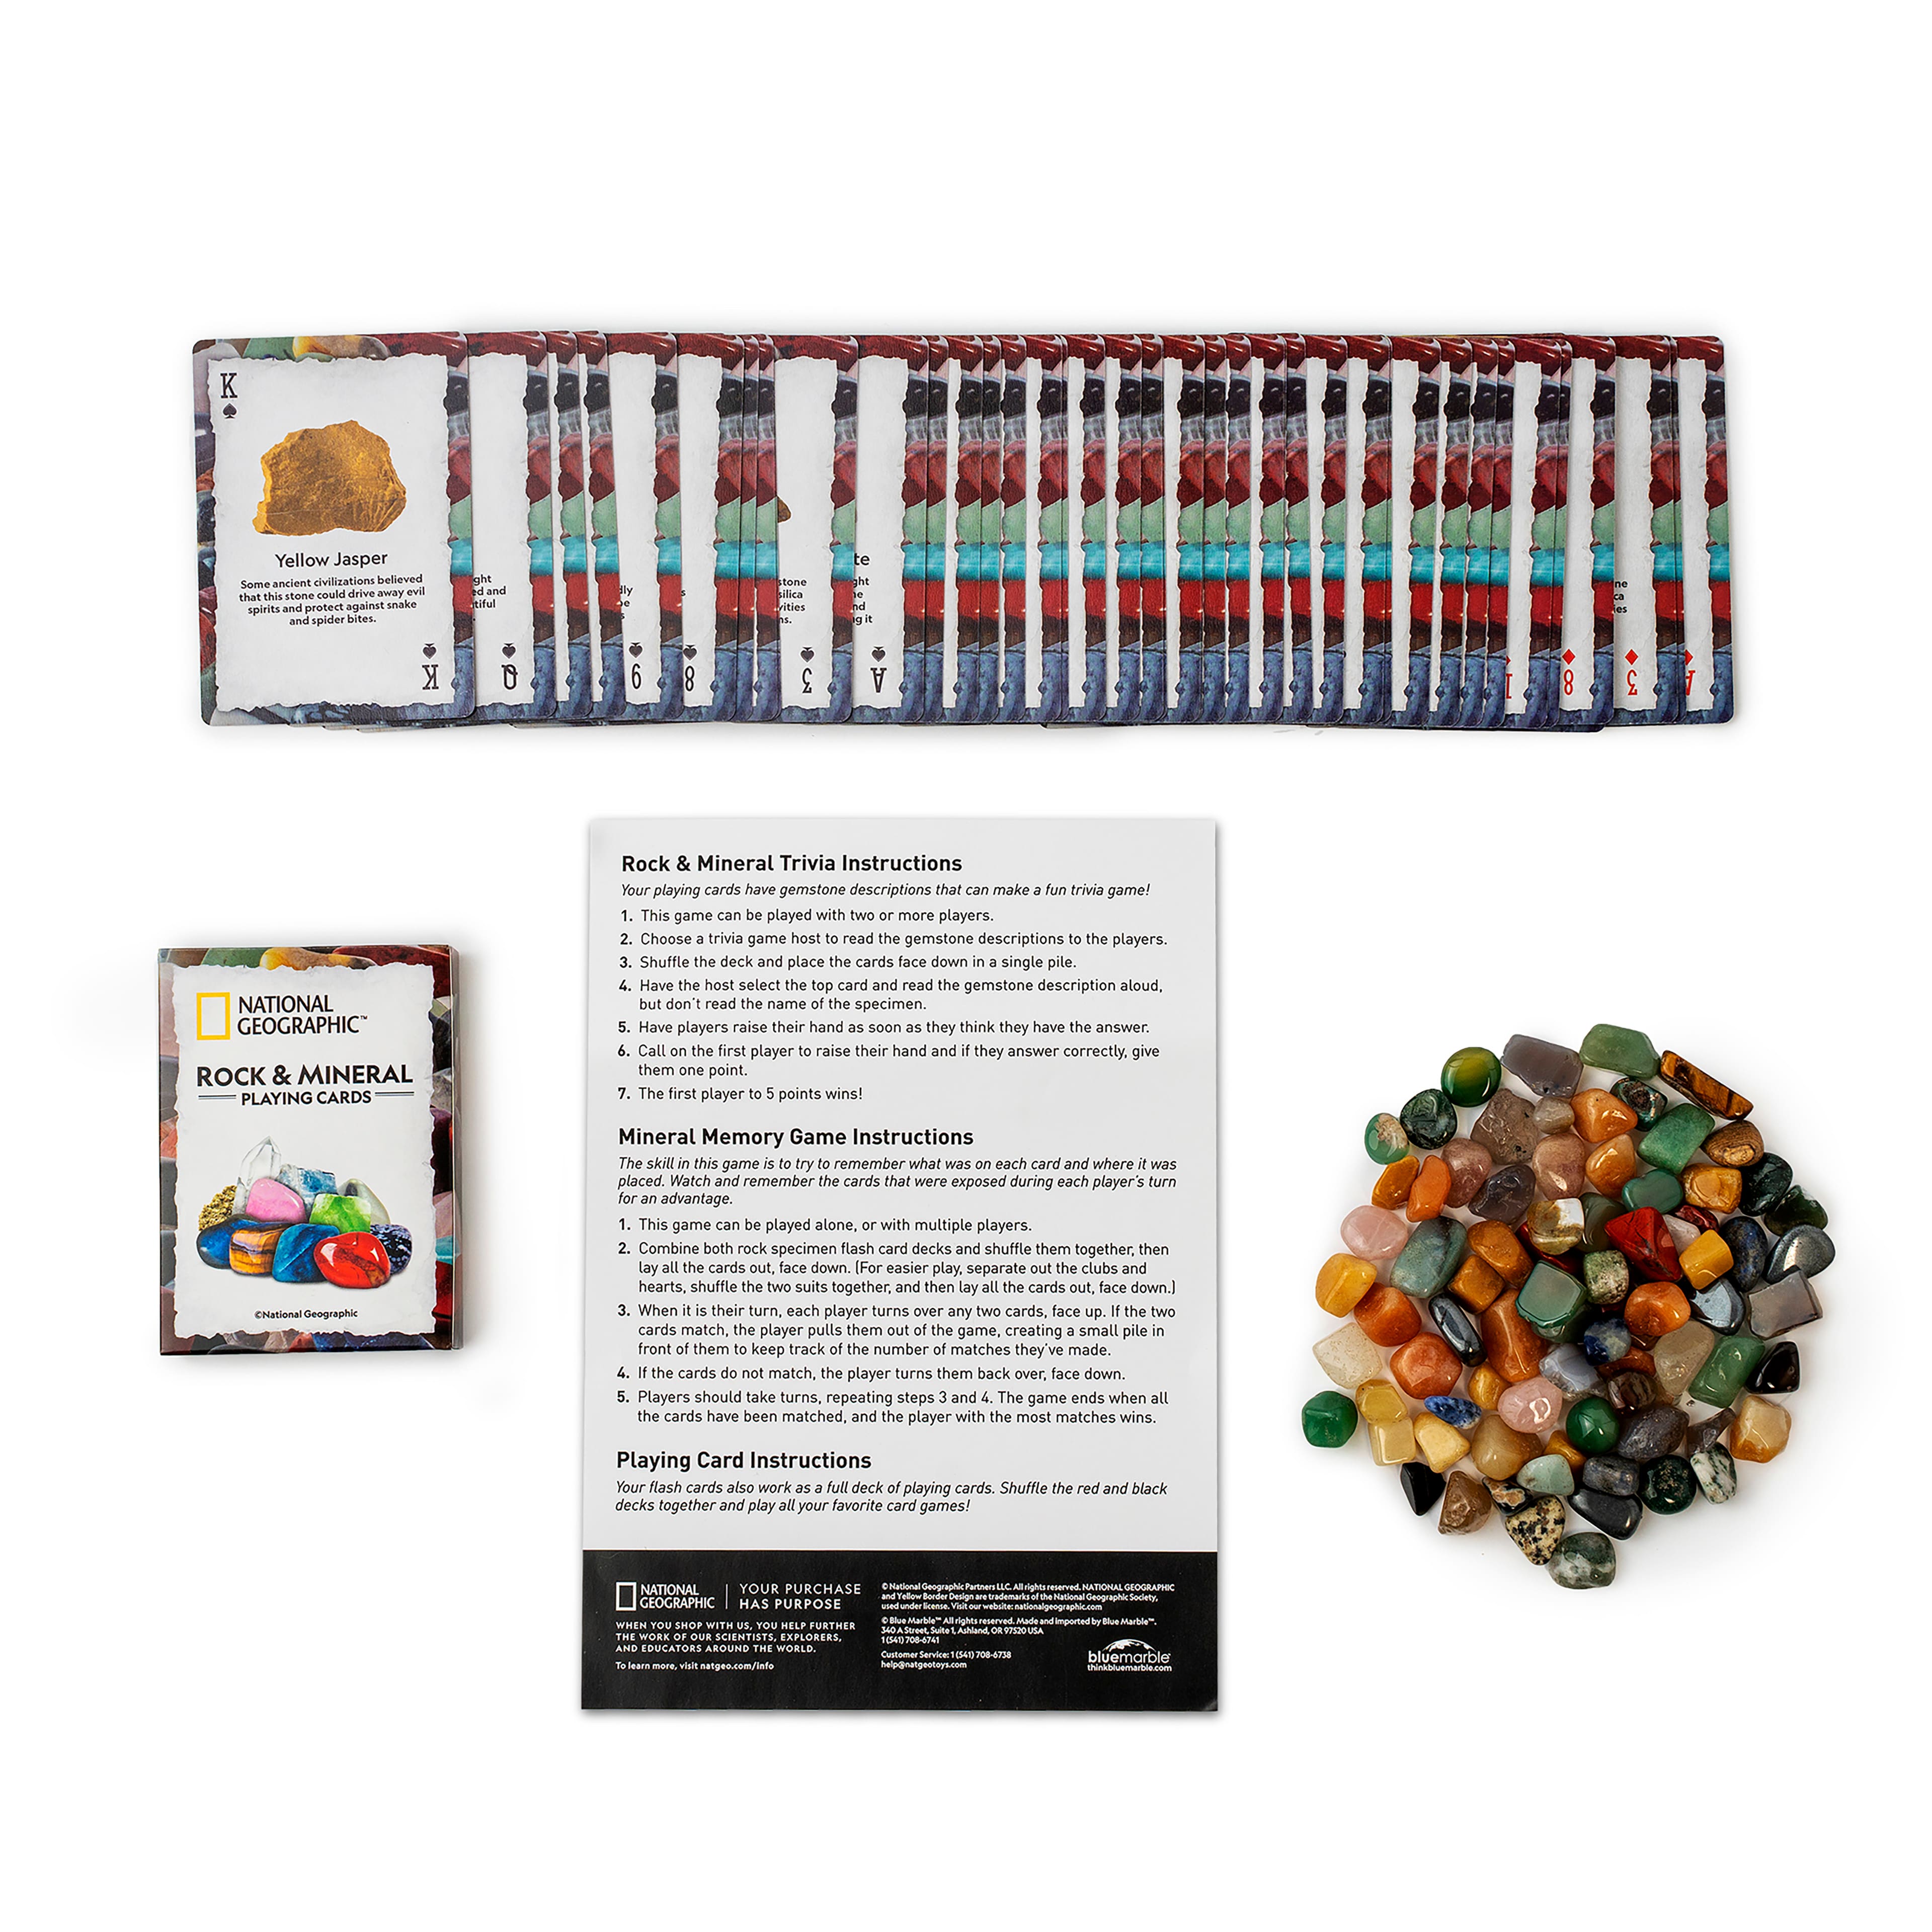 12 Pack: National Geographic&#x2122; S.T.E.M. Rock &#x26; Mineral Card Games